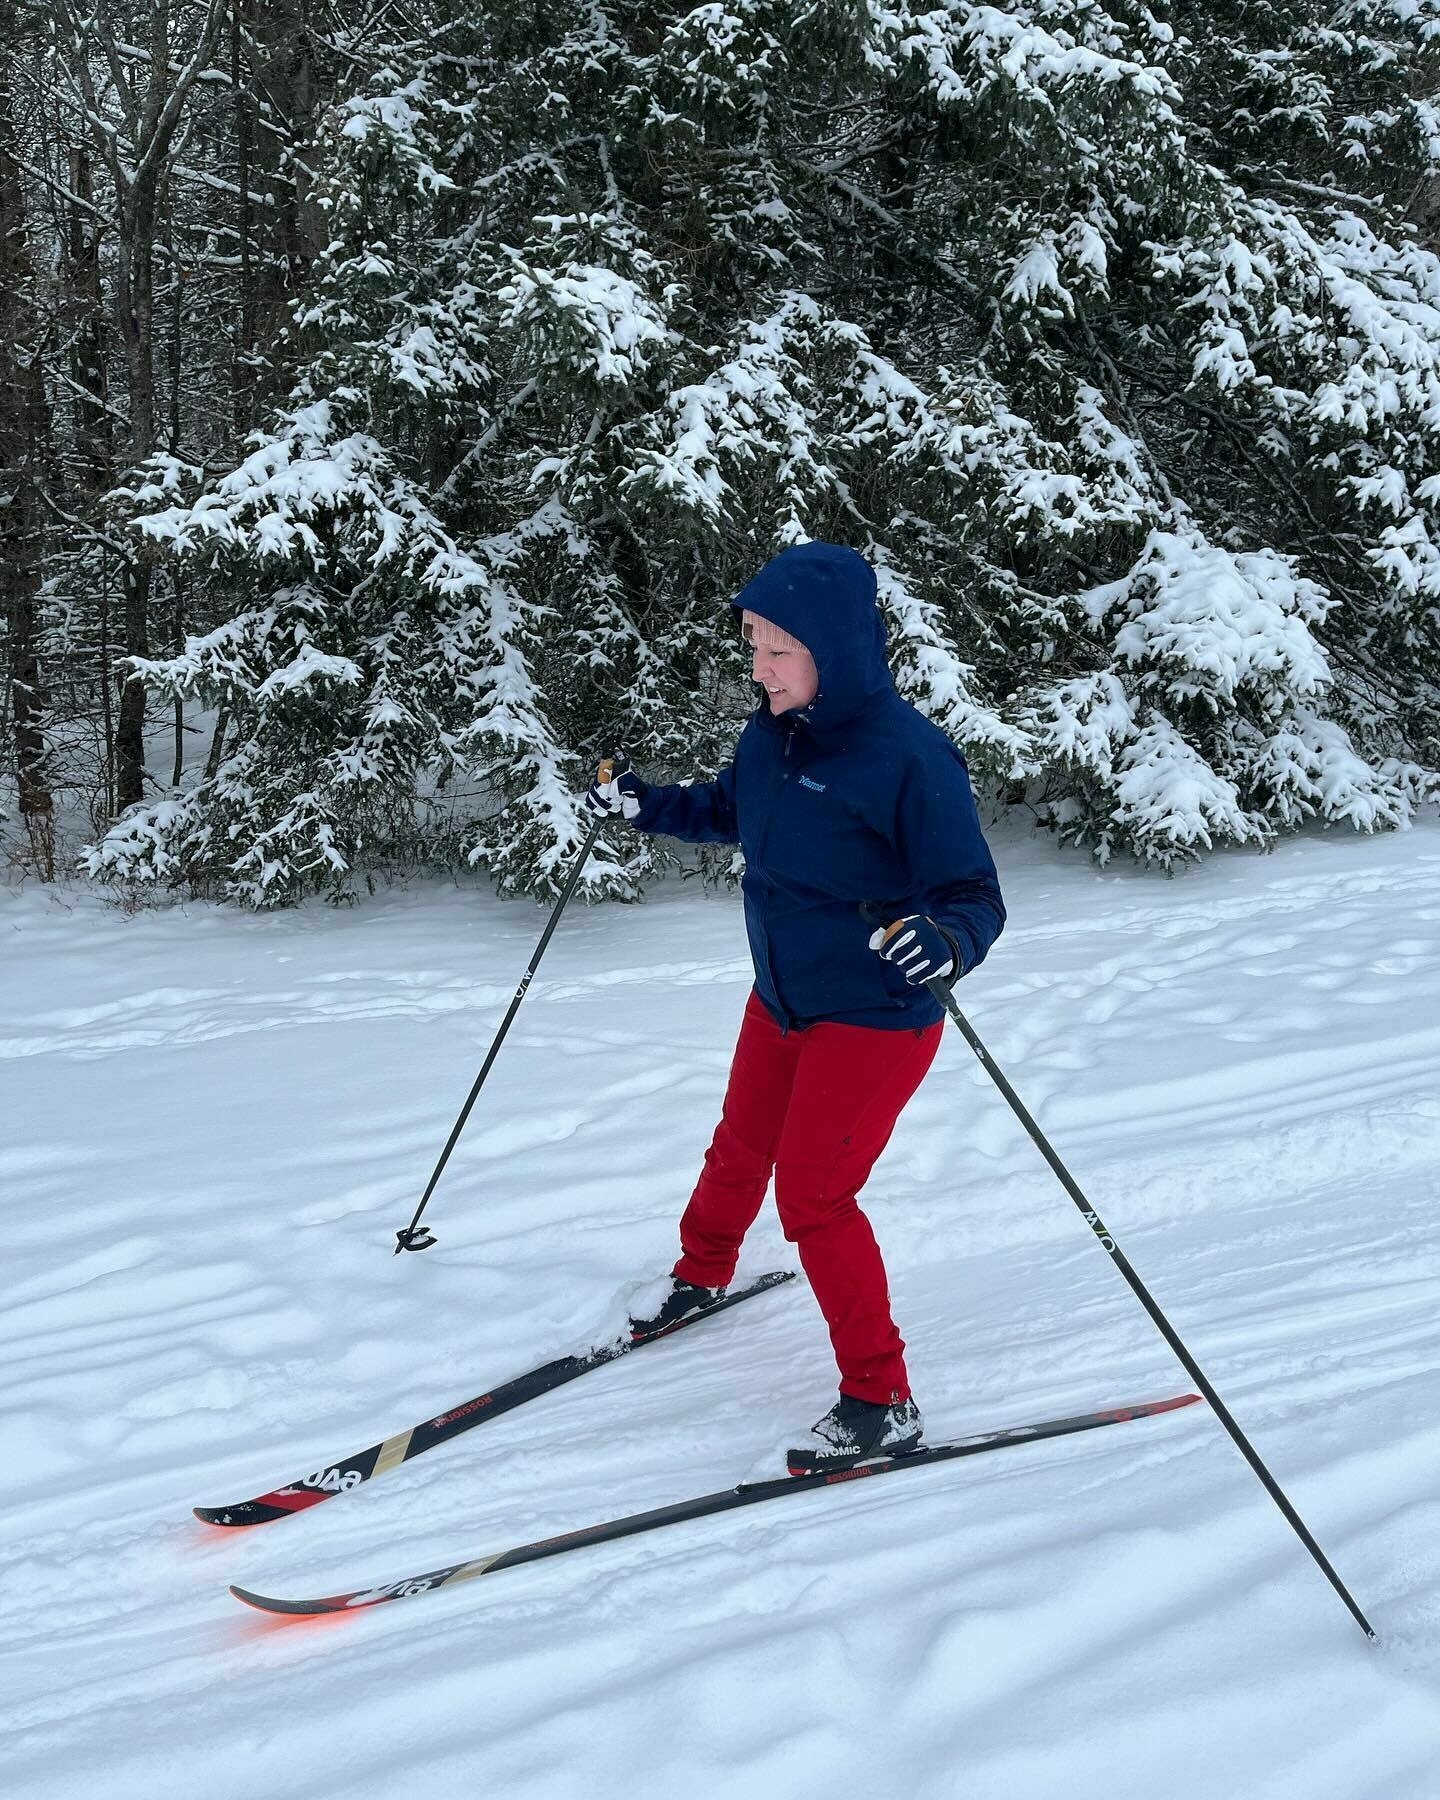 A person is cross-country skiing on snow-covered ground, flanked by snow-laden evergreen trees. They are dressed in winter gear, including a blue jacket and red pants.